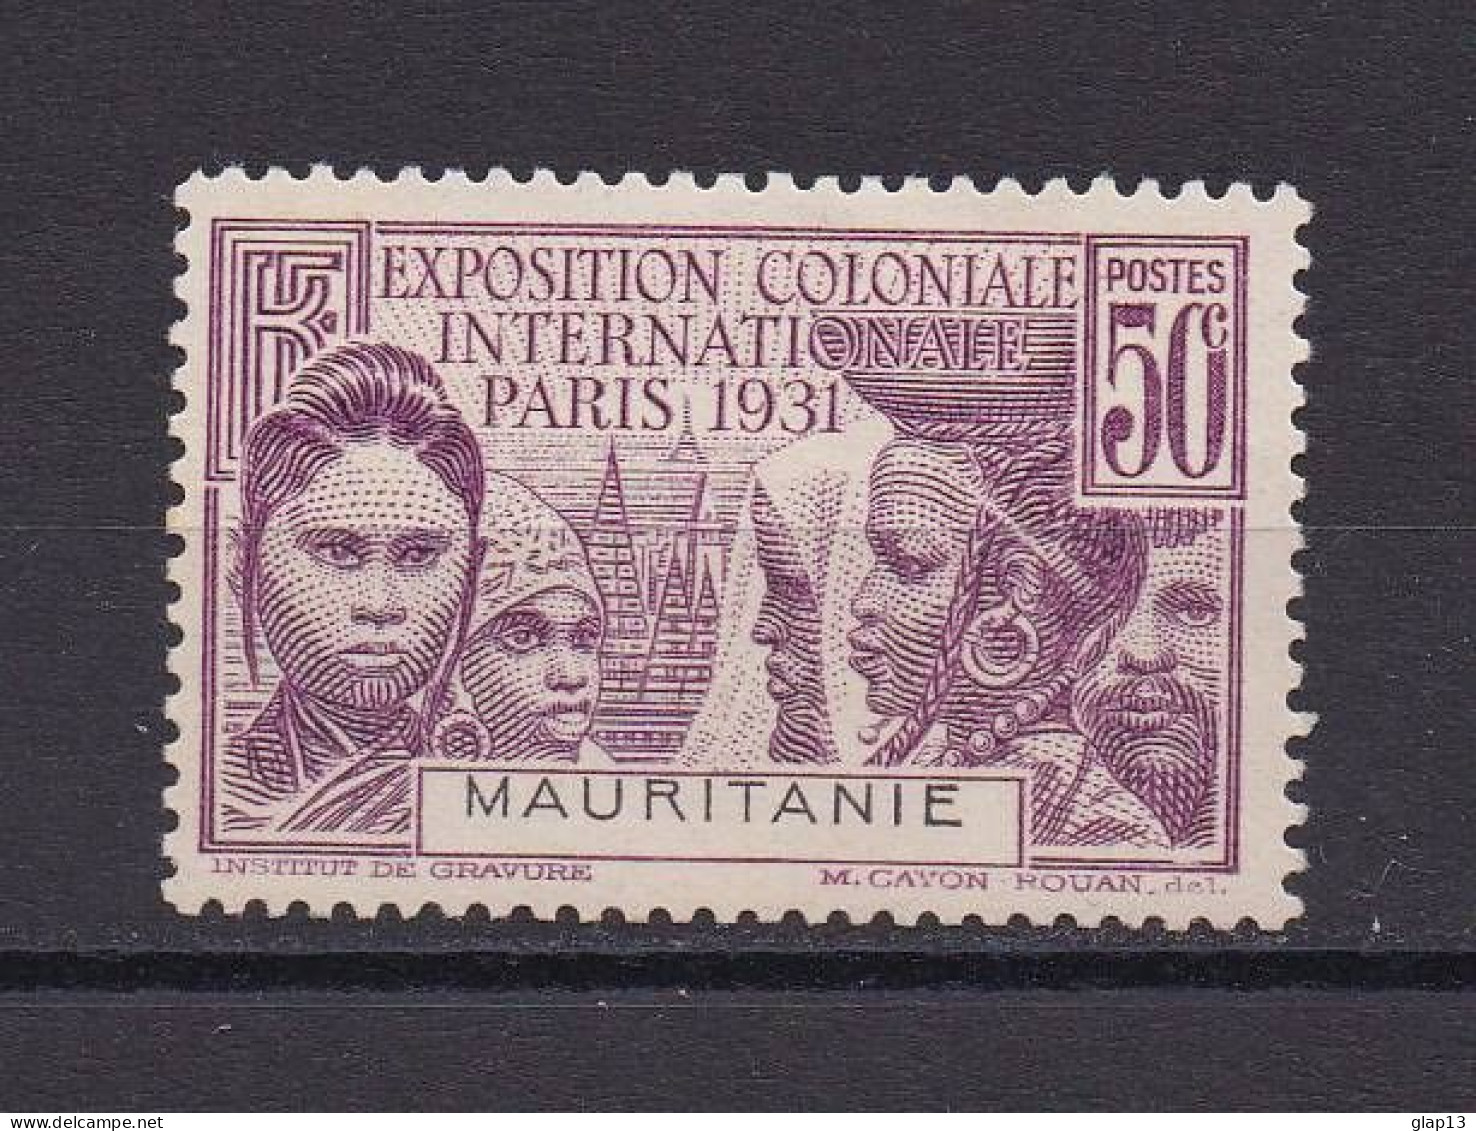 MAURITANIE 1931 TIMBRE N°63 NEUF AVEC CHARNIERE EXPOSITION - Nuevos